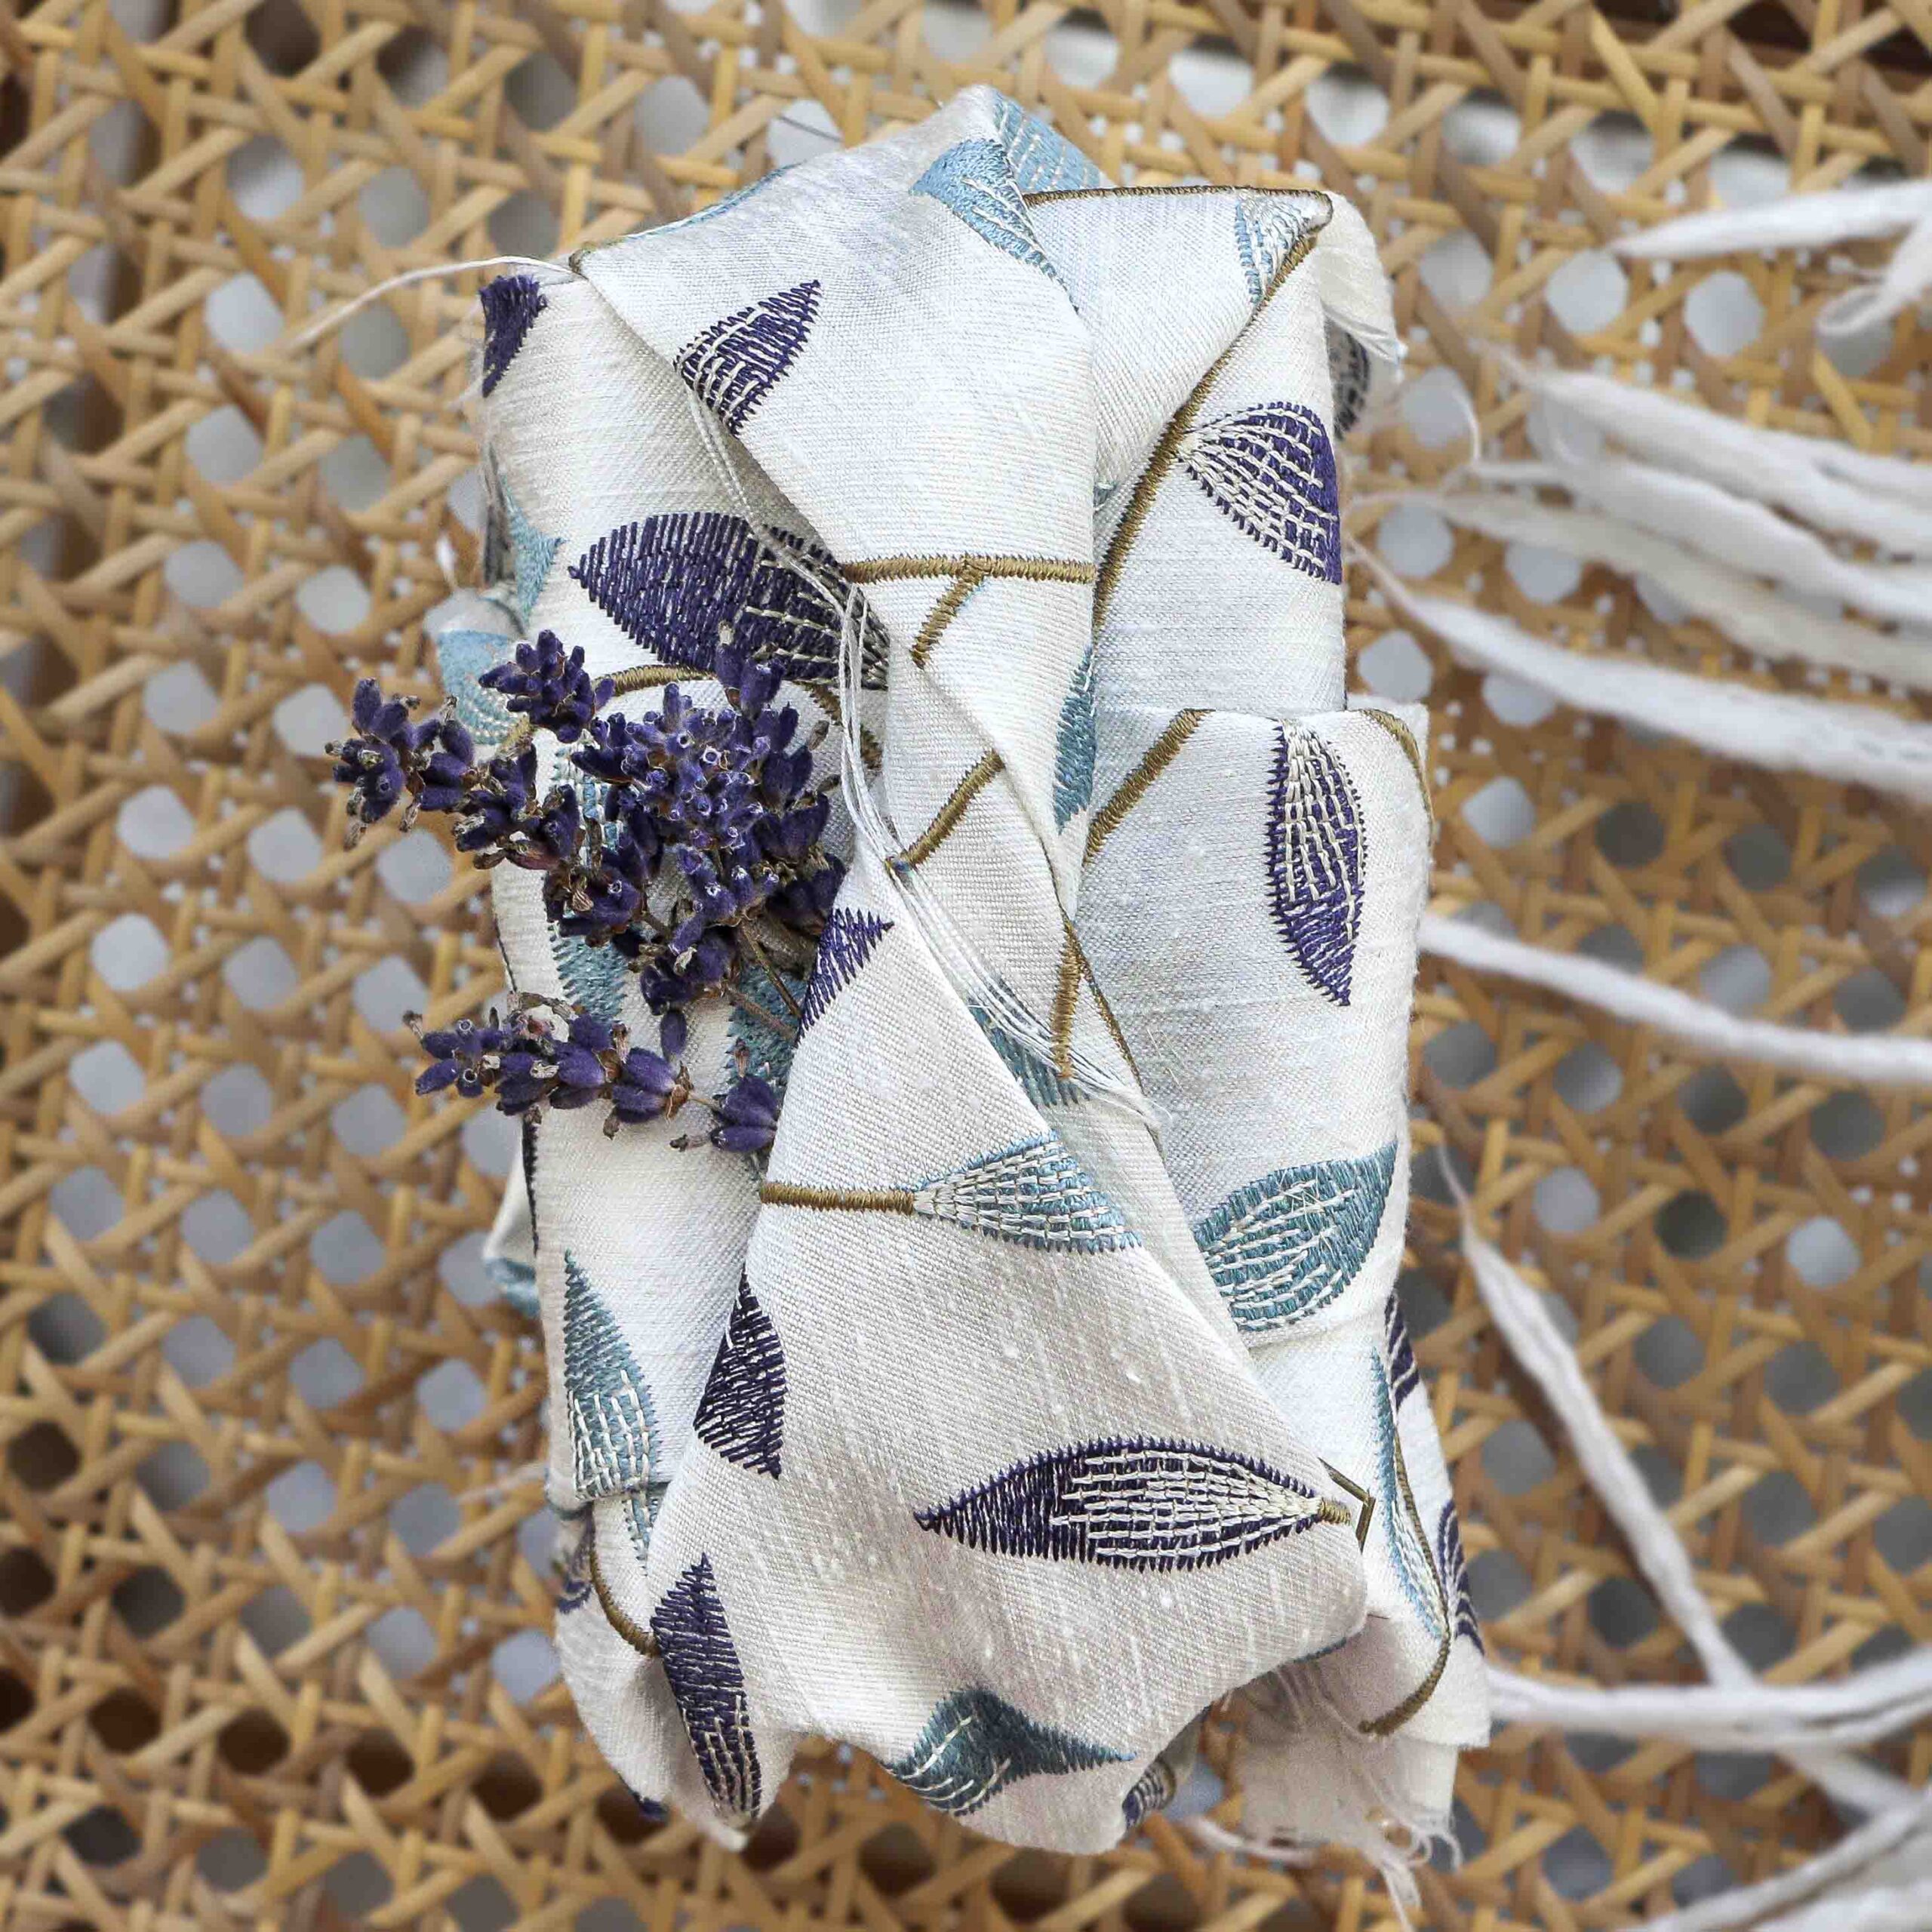 Fabric Gift wrapping Inspiration StephieAnn